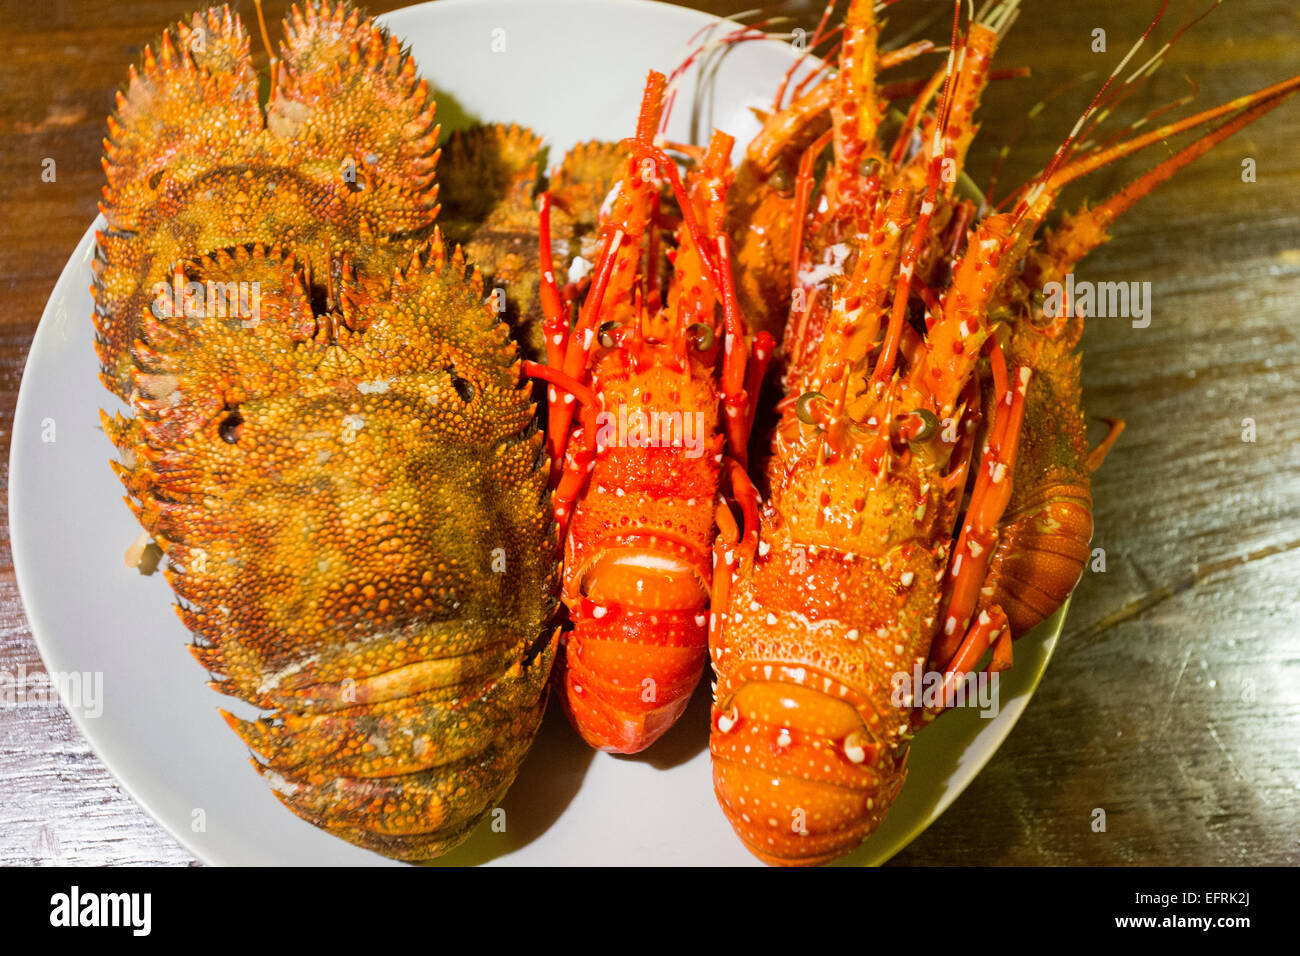 Boiled lobsters Stock Photo